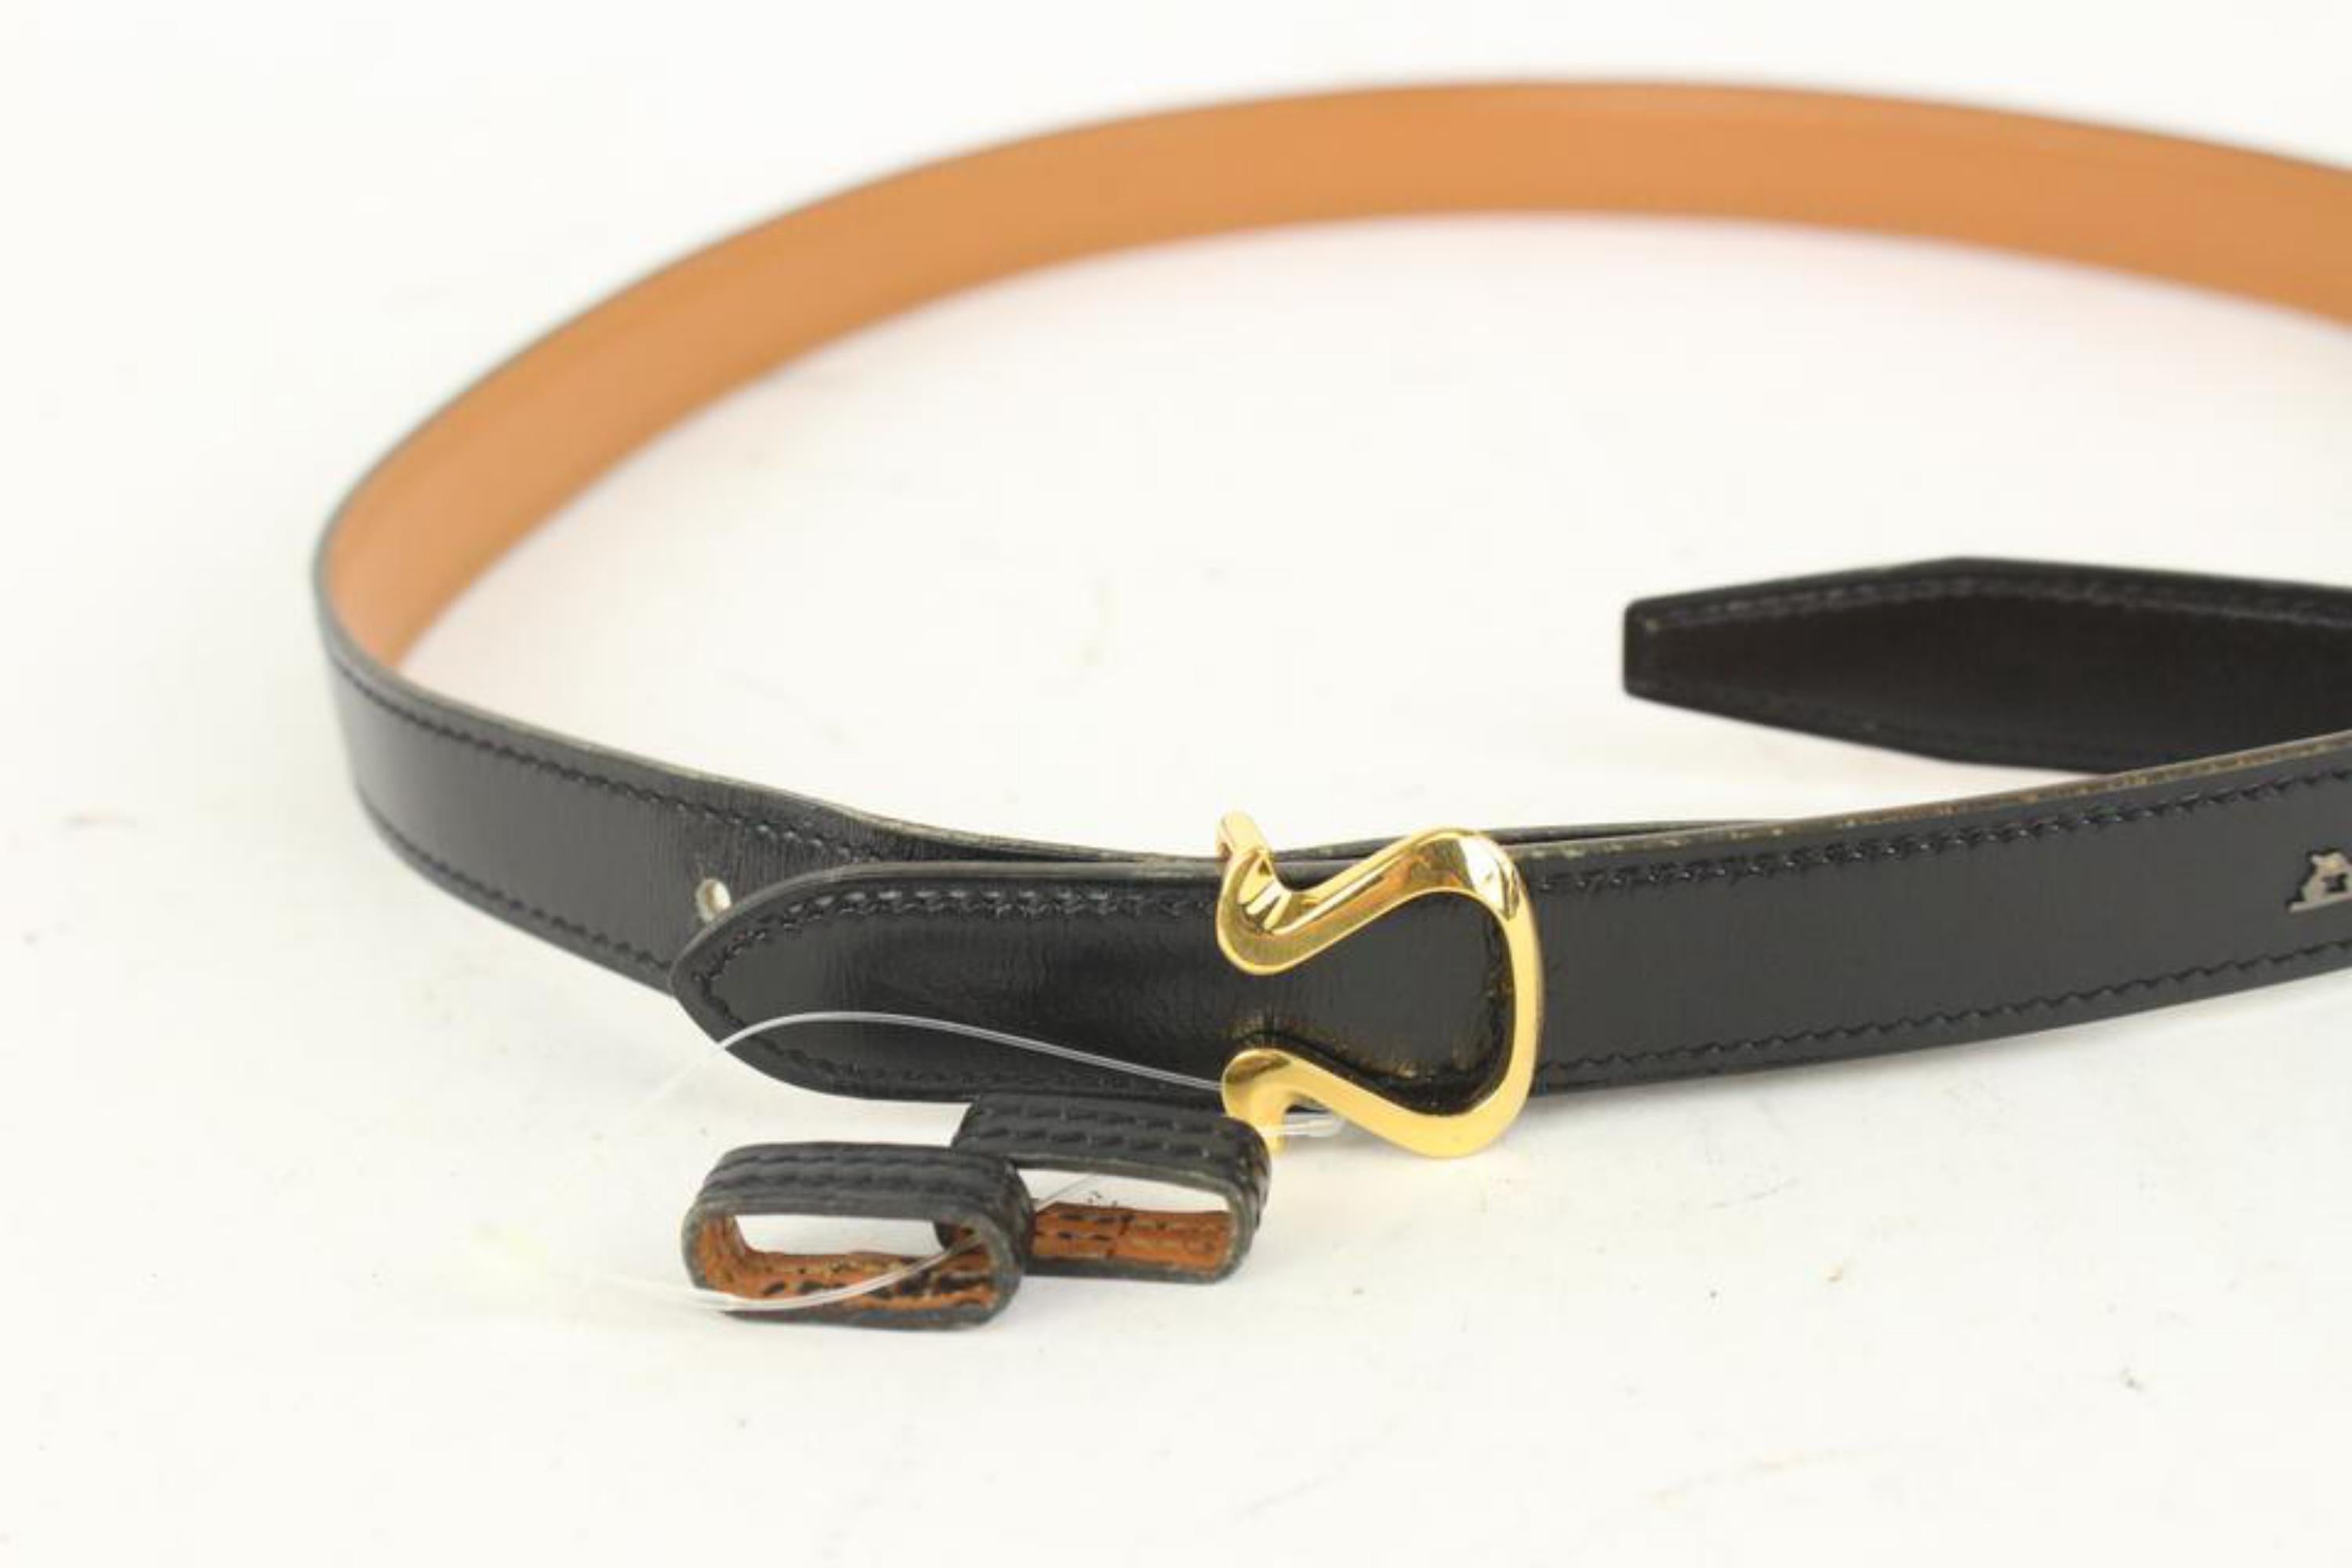 Hermès 18mm Black x Gold Harp Belt 1018h4 In Good Condition For Sale In Dix hills, NY